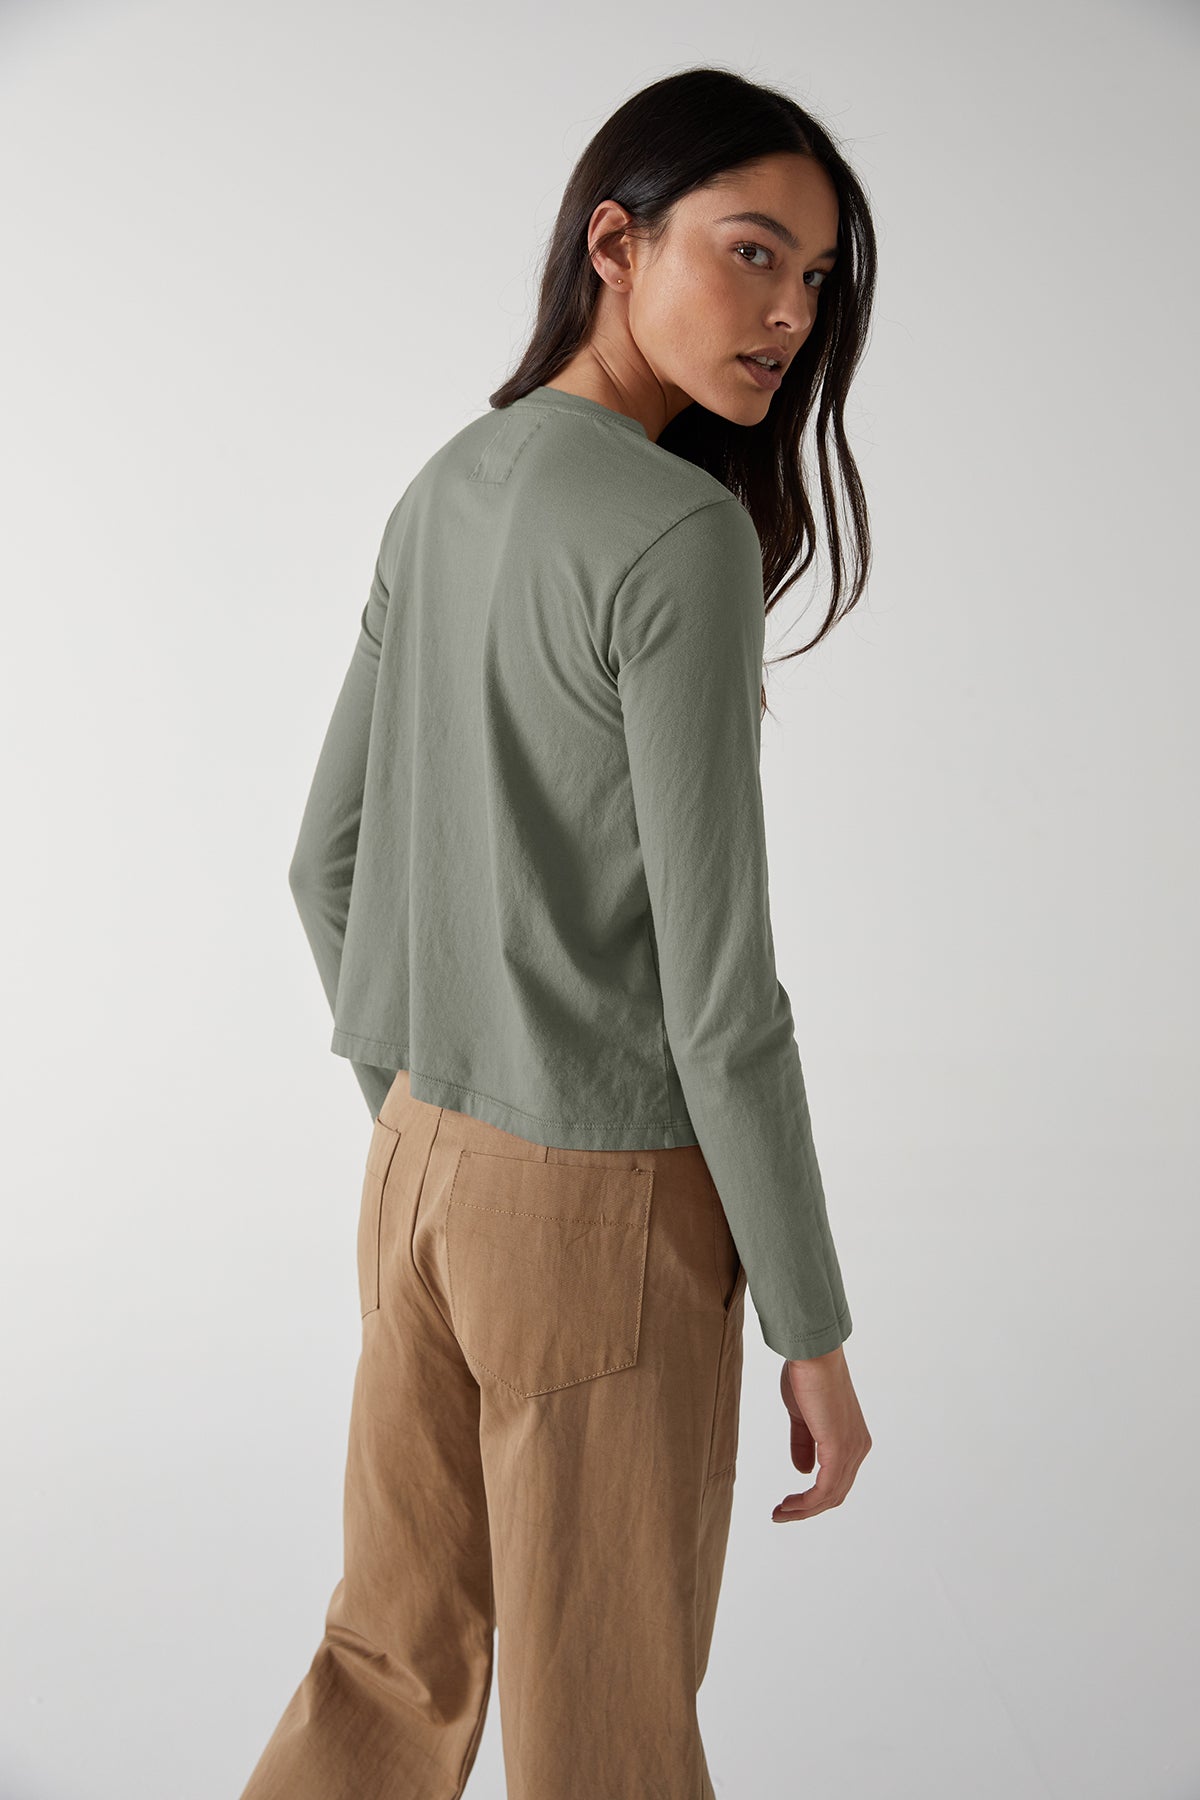   The back view of a woman wearing VICENTE TEE khaki pants and a long sleeved top by Velvet by Jenny Graham. 